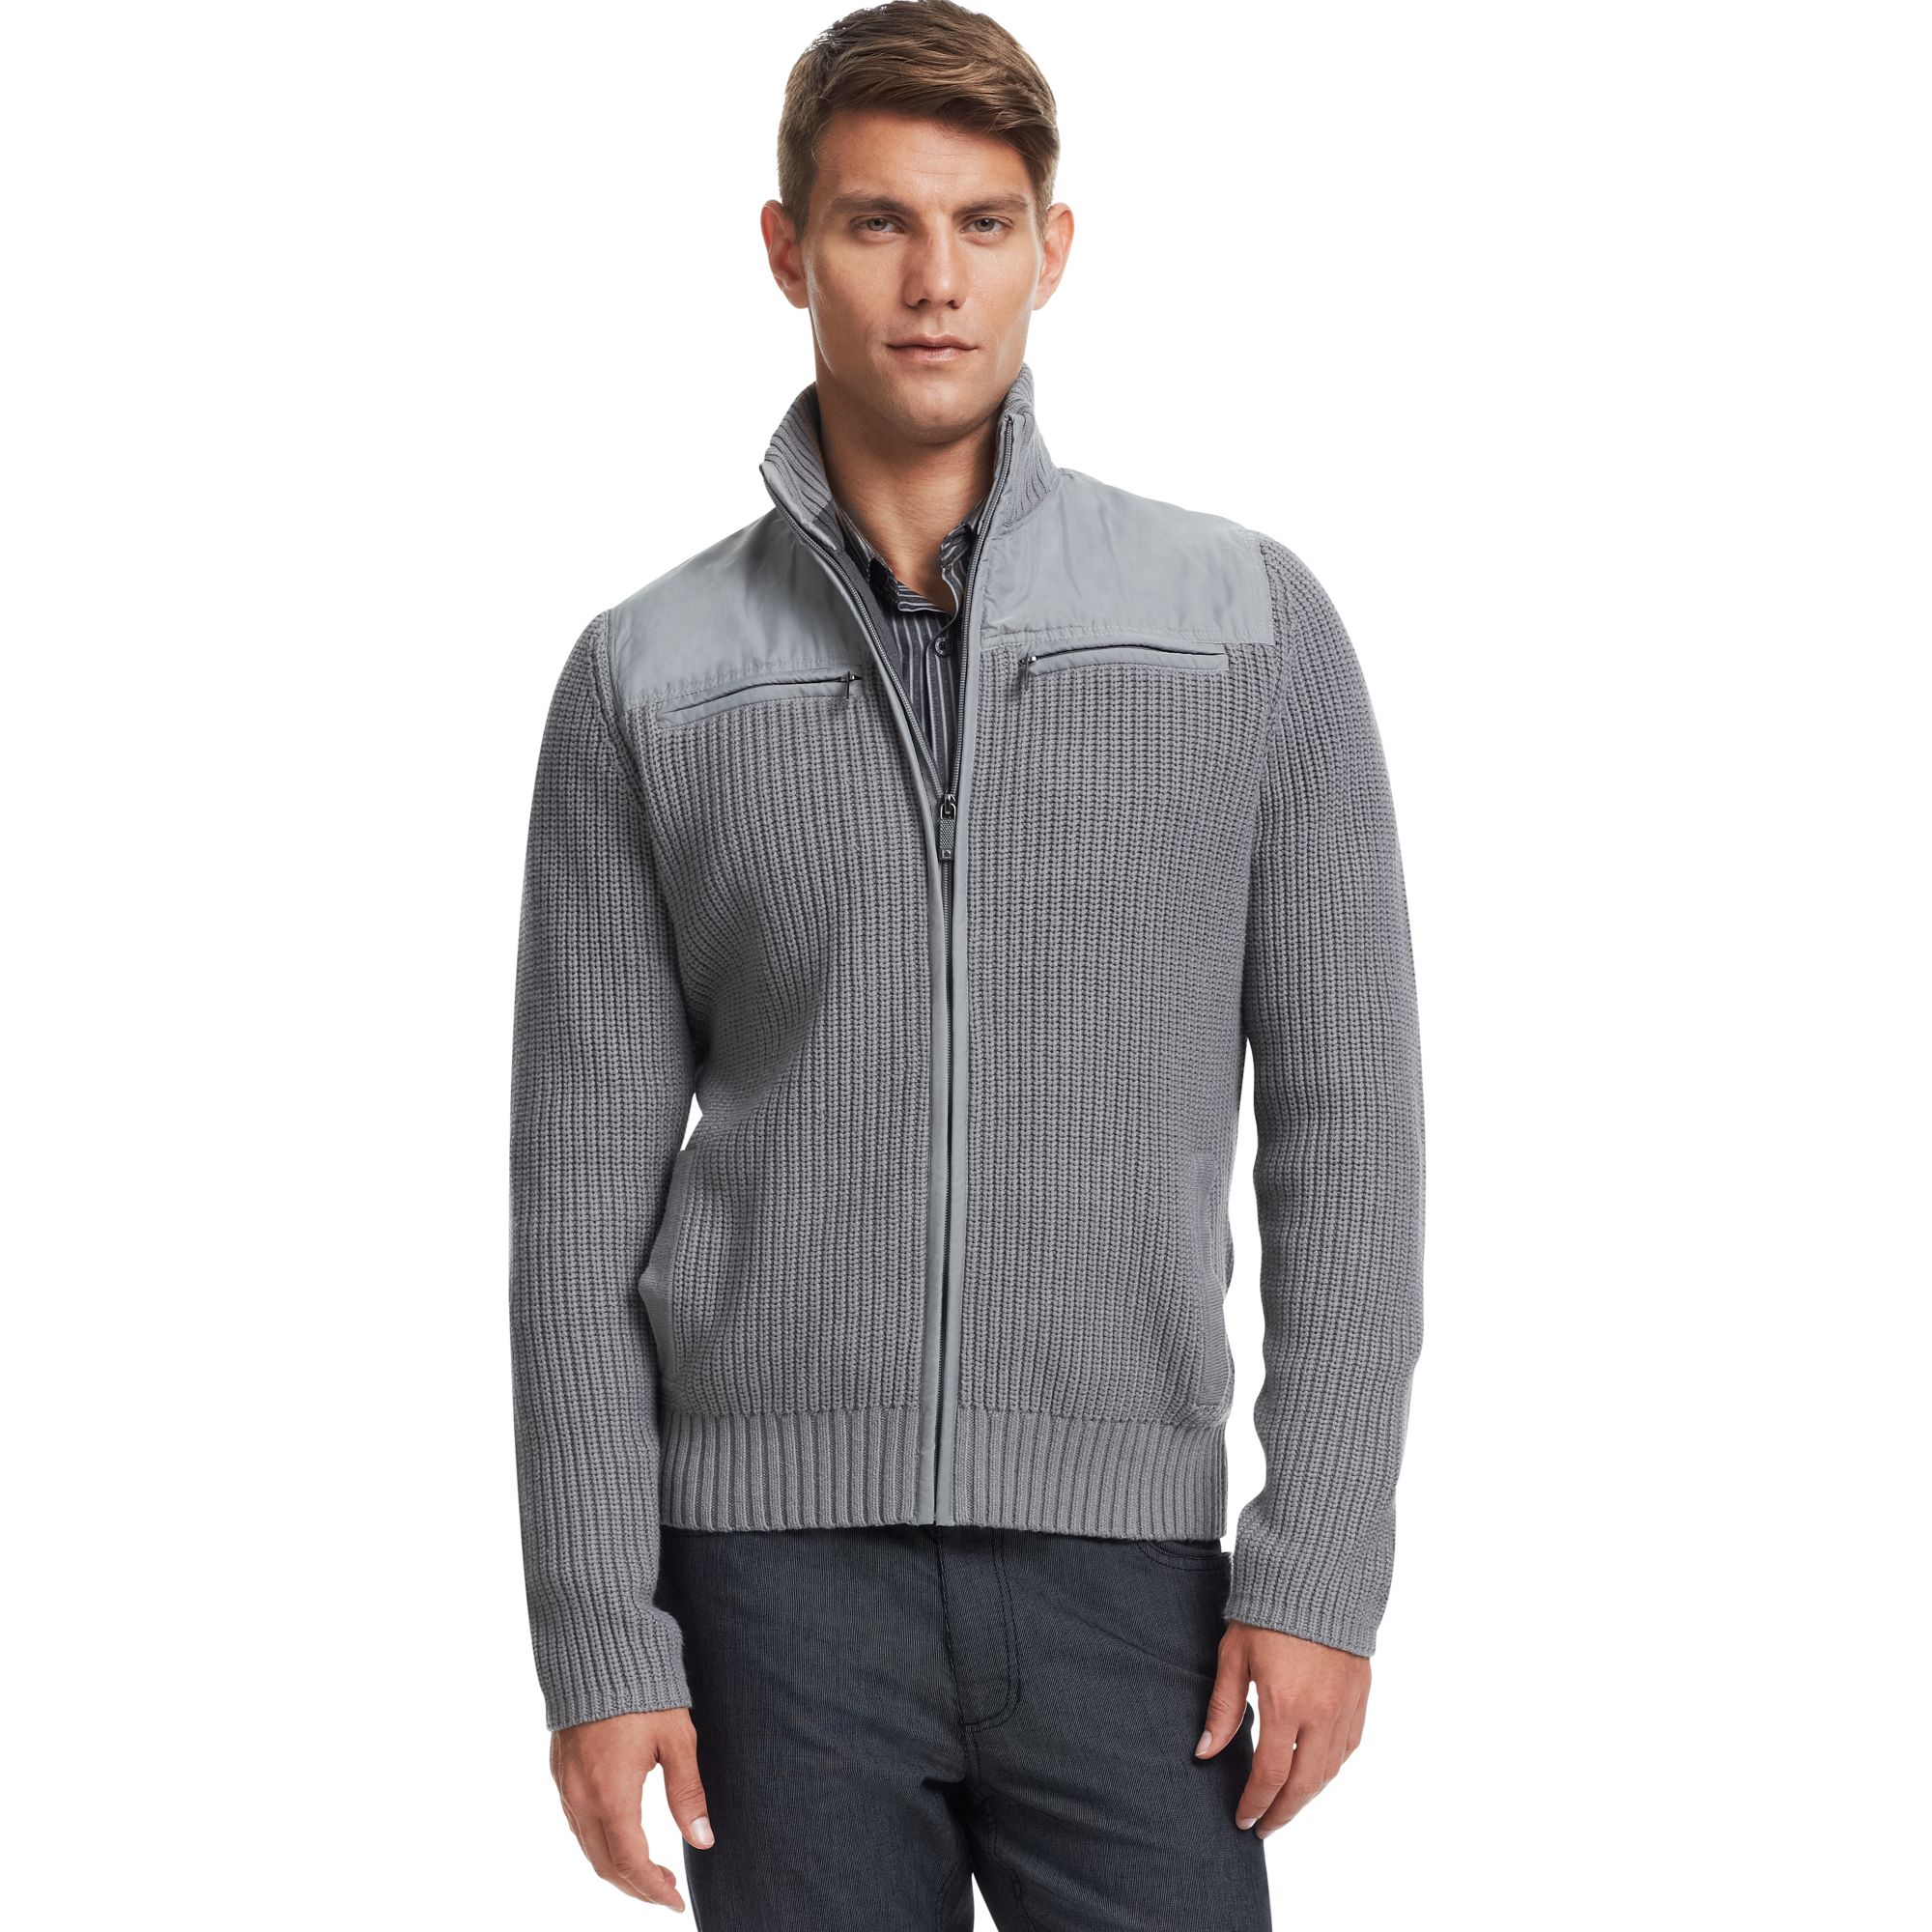 Lyst - Kenneth cole reaction Chunky Full Zipper Sweater in Gray for Men